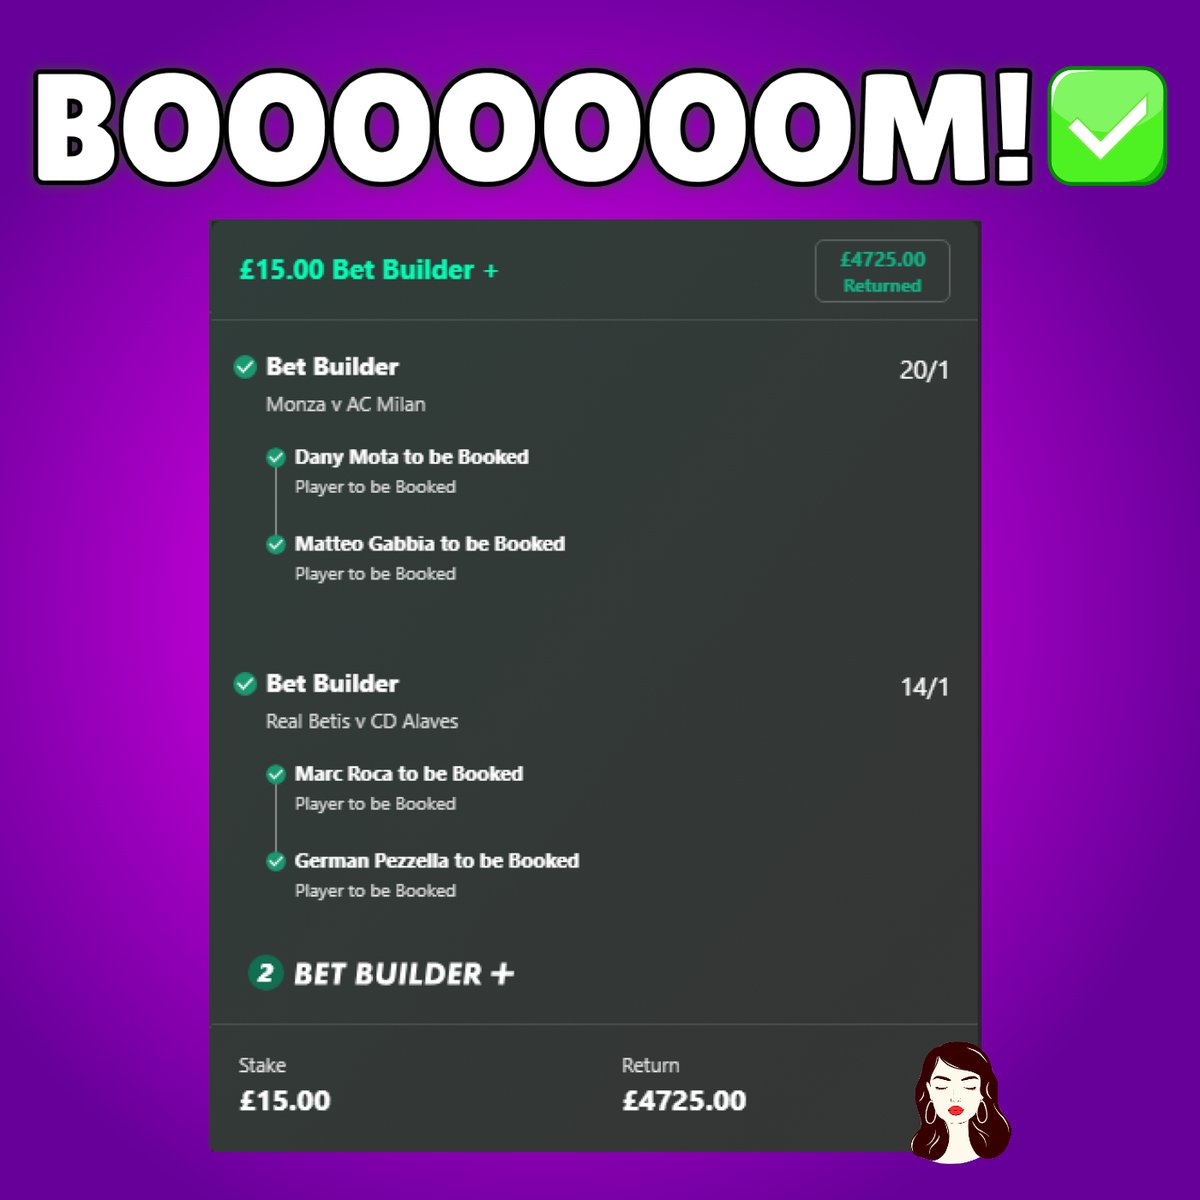 BOOOOOOOM! 😍✅ MY 314/1 BET BUILDER LANDS!🔥 This bet was posted on my Instagram page last night! 🫶 Every single person who ❤️ and retweets this tweet will get my tips for FREE! 👀 Turn my notifications on and drop me a follow so you don't miss out on more longshots🔔